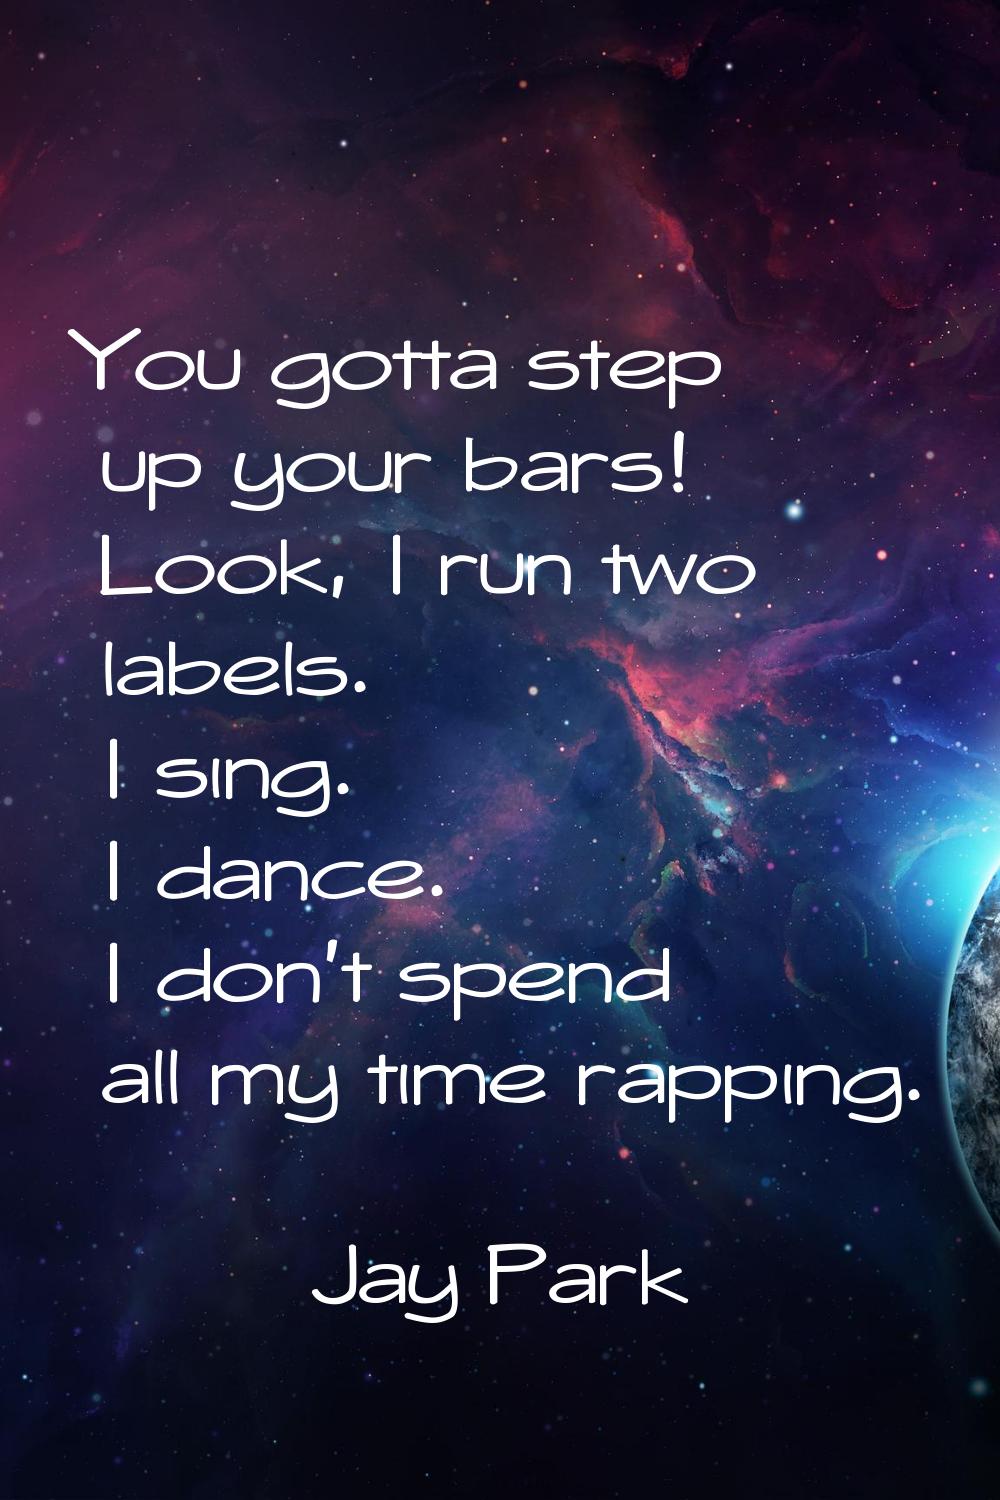 You gotta step up your bars! Look, I run two labels. I sing. I dance. I don't spend all my time rap